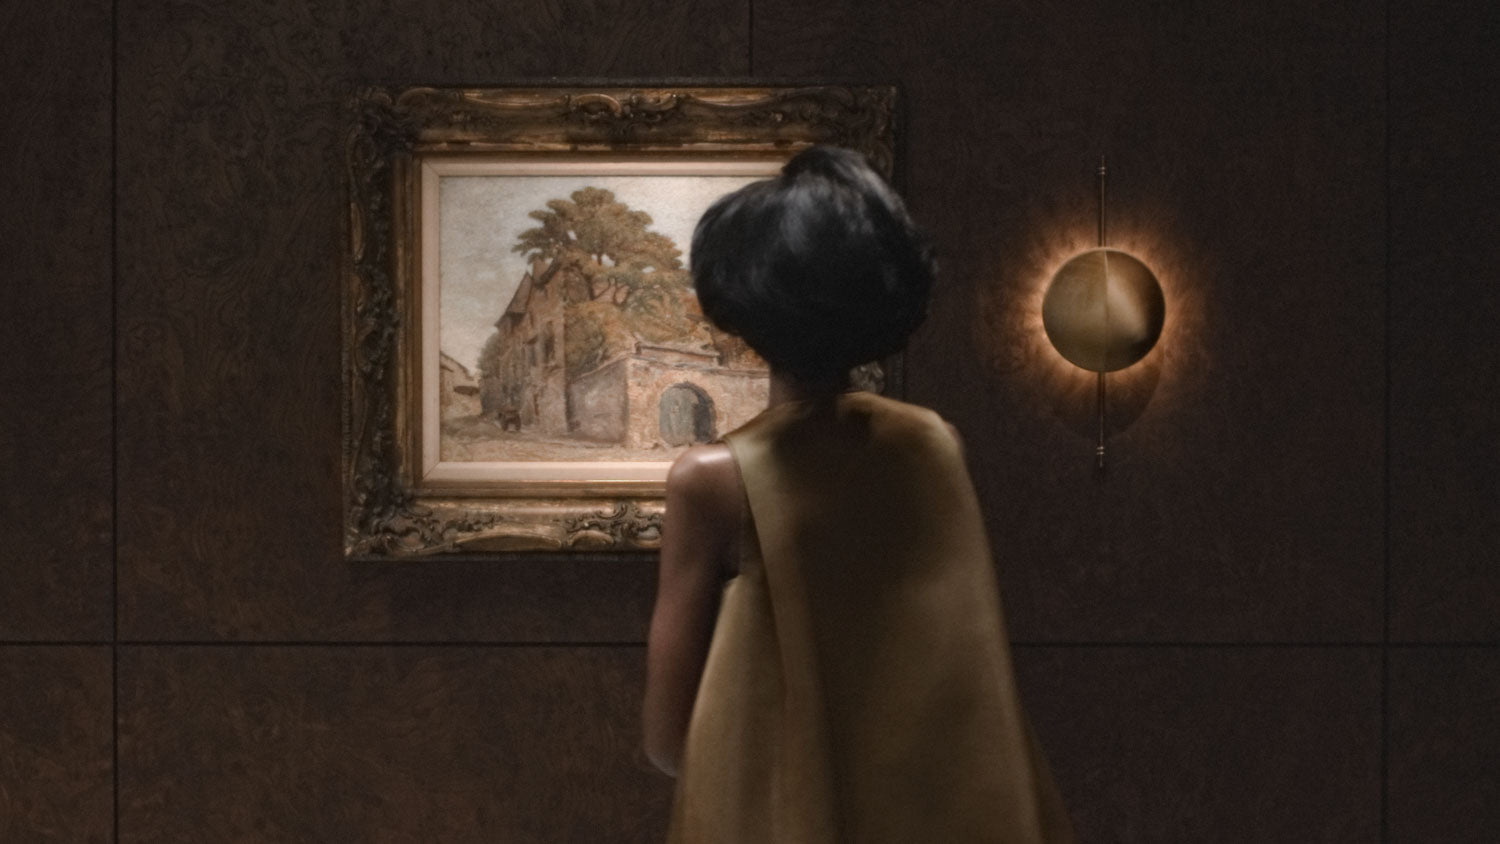 A woman is admiring a painting with an illuminated STARLET sconce mounted next to it on the wall. 